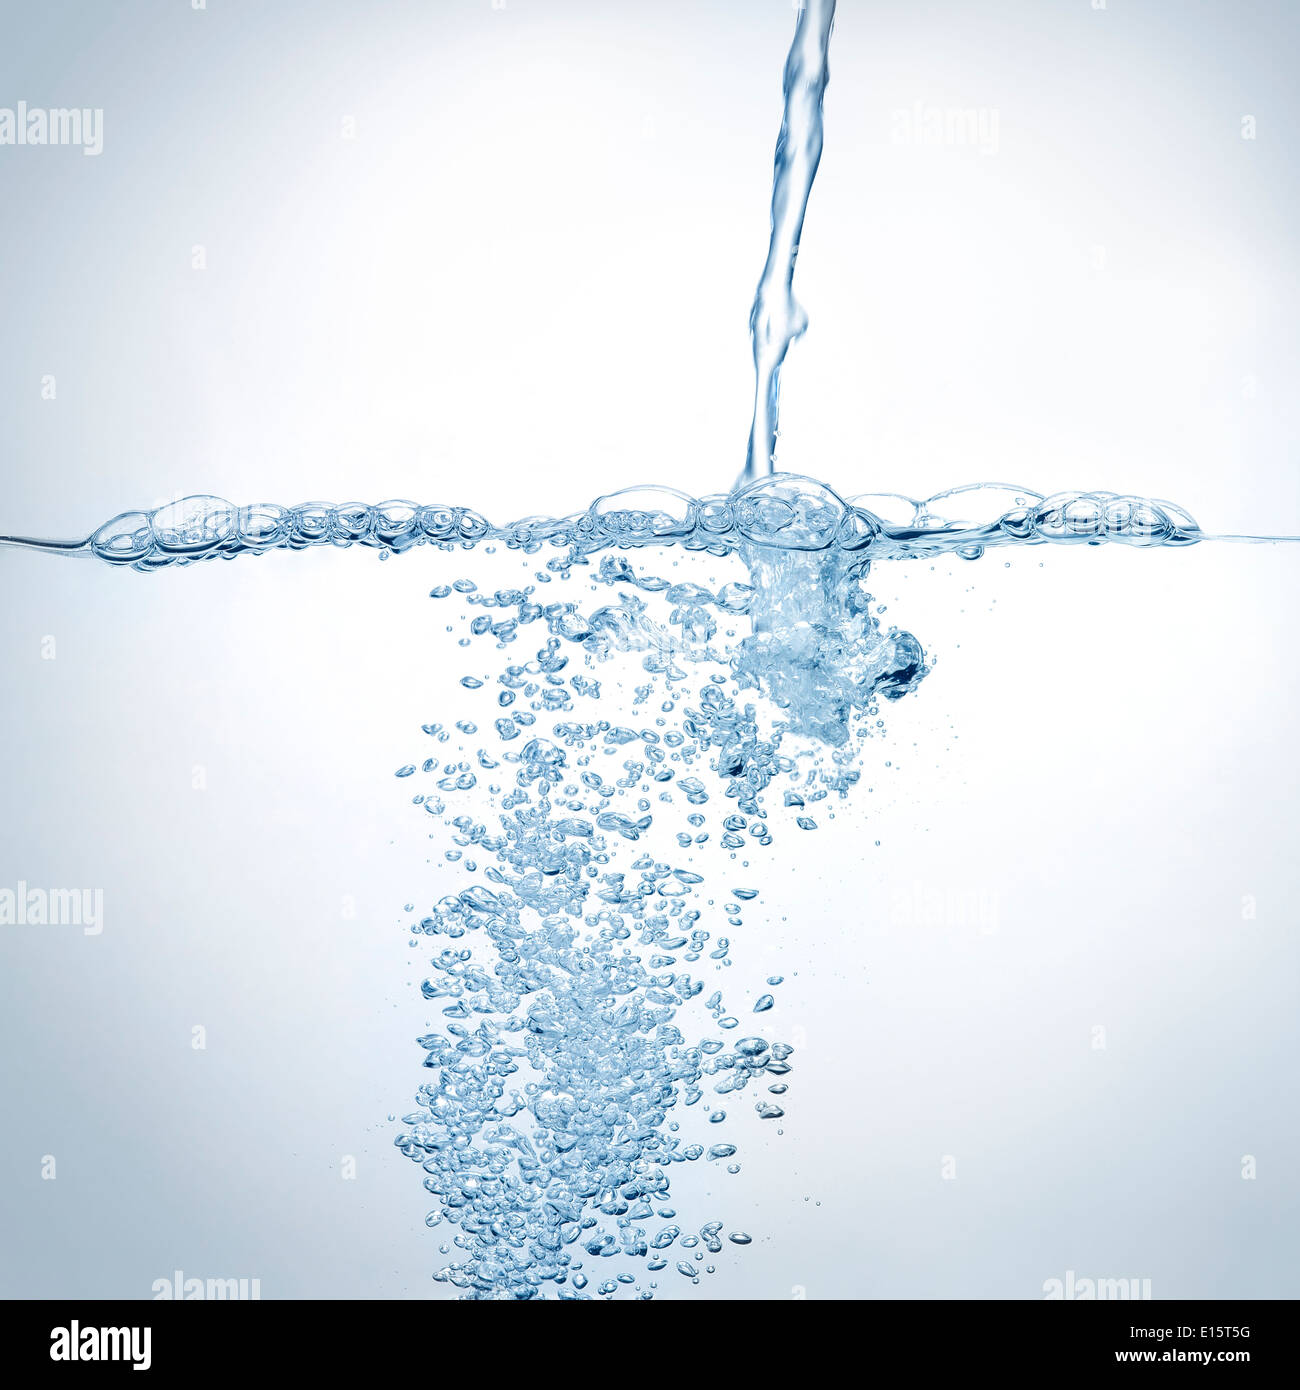 Water jet splashing and bubbles in blue tone Stock Photo